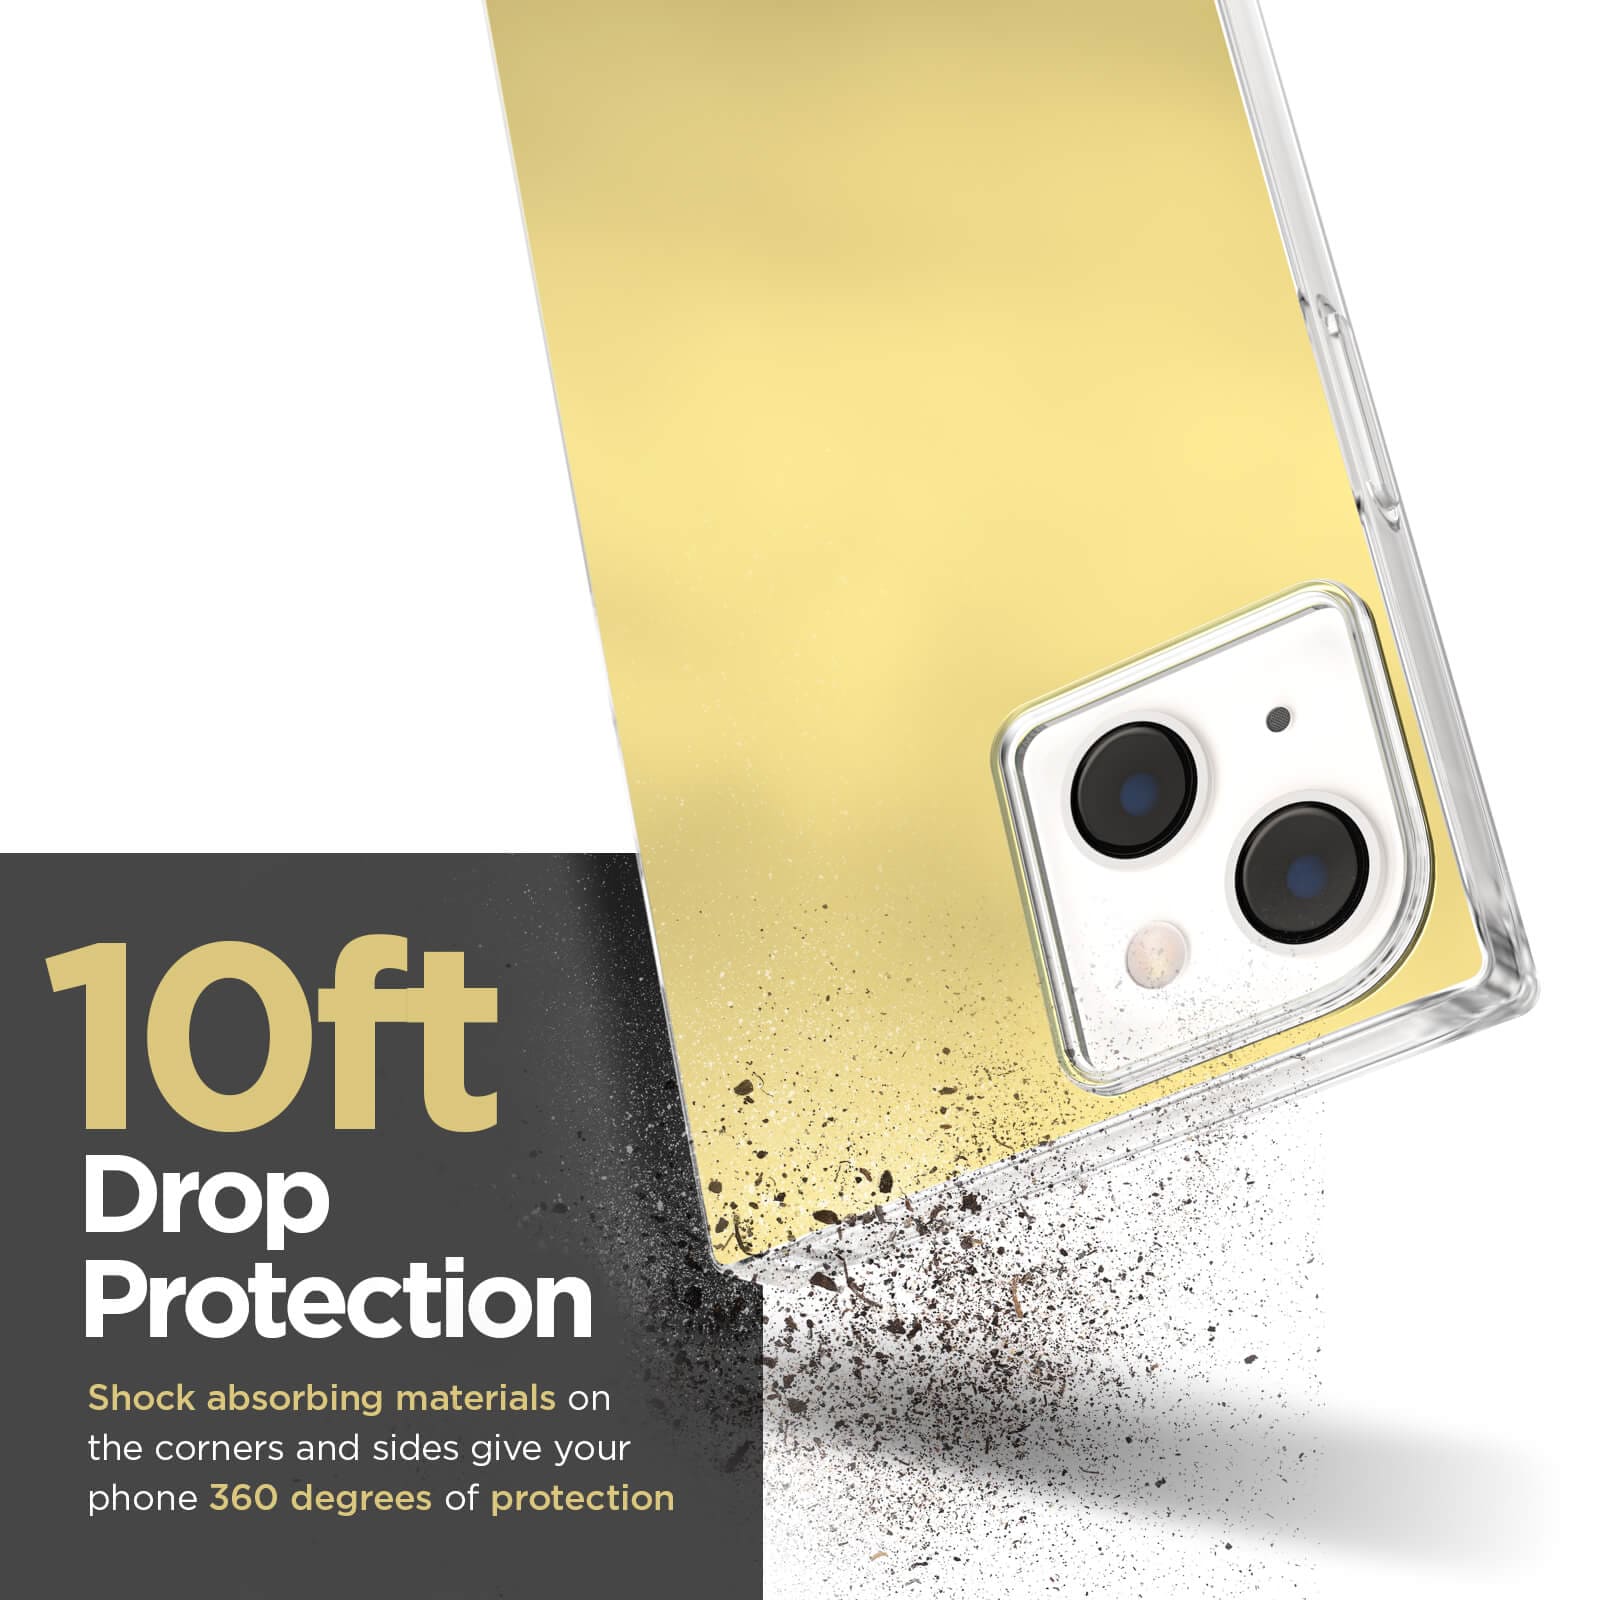 10ft drop protection. Shock absorbing materials on the corners and sides give your phone 360 degrees of protection. color::Gold